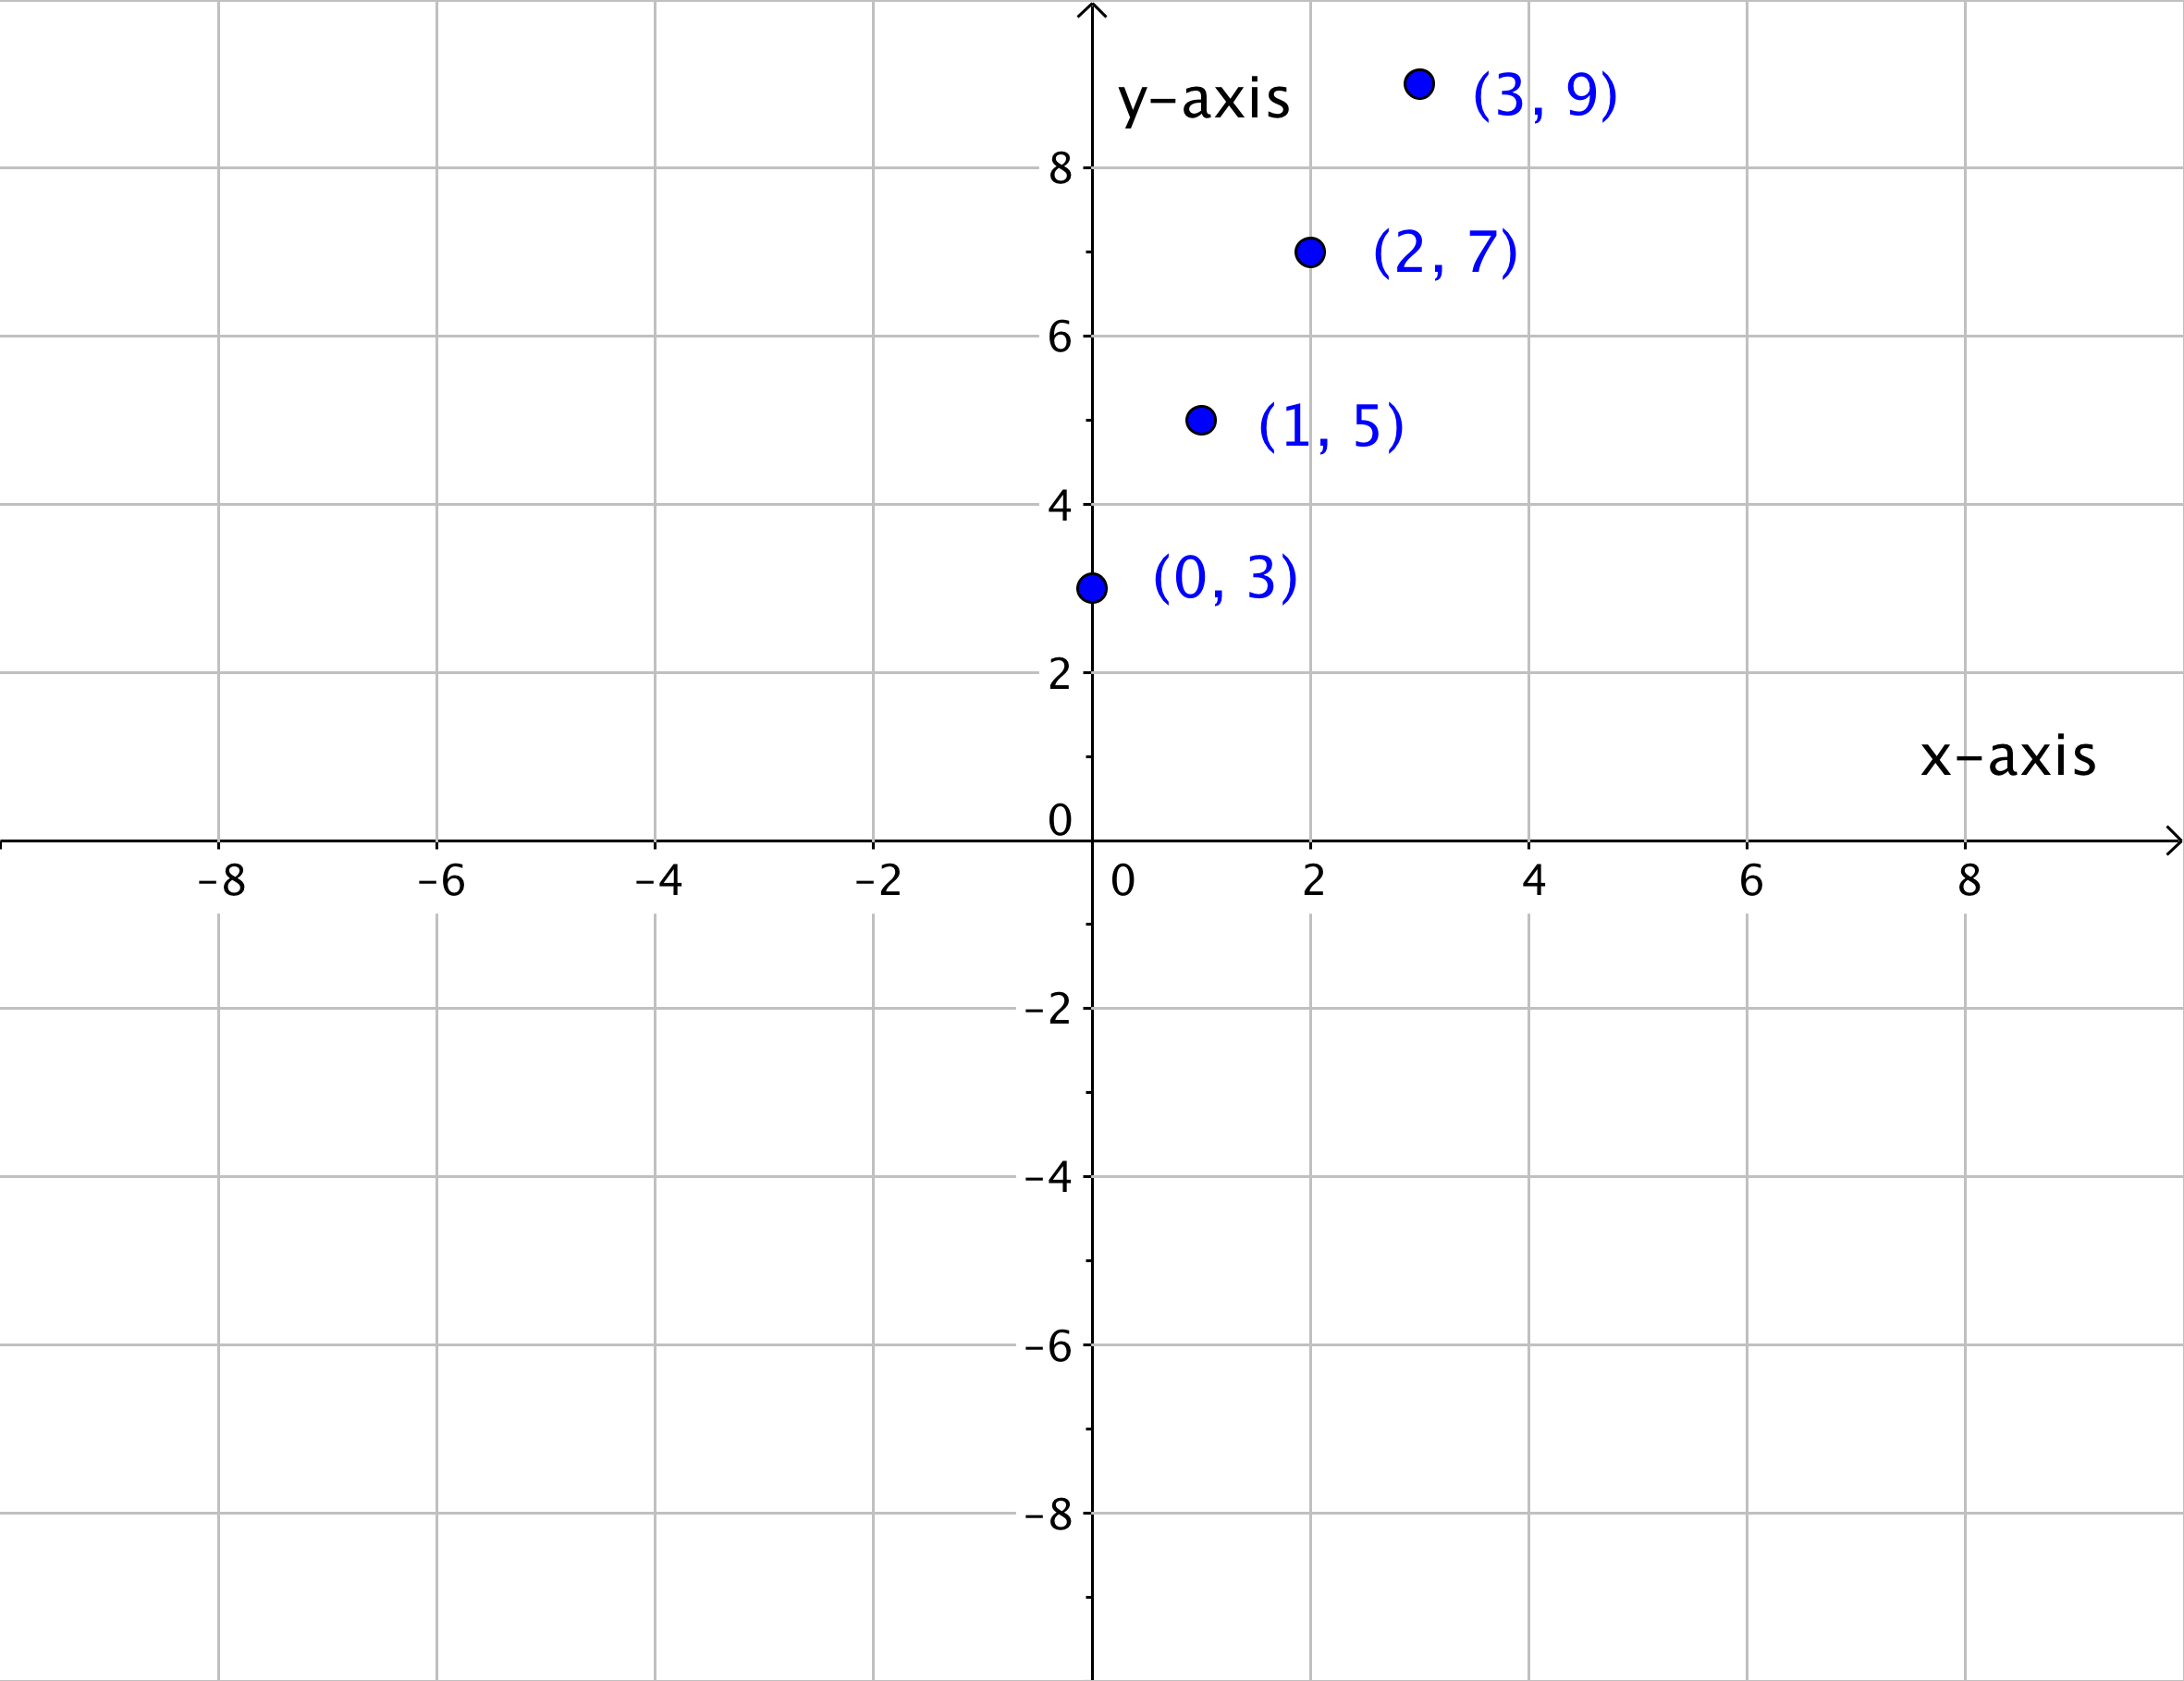 Graph showing the point (0,3); the point (1,5); the point (2,7); and the point (3,9).